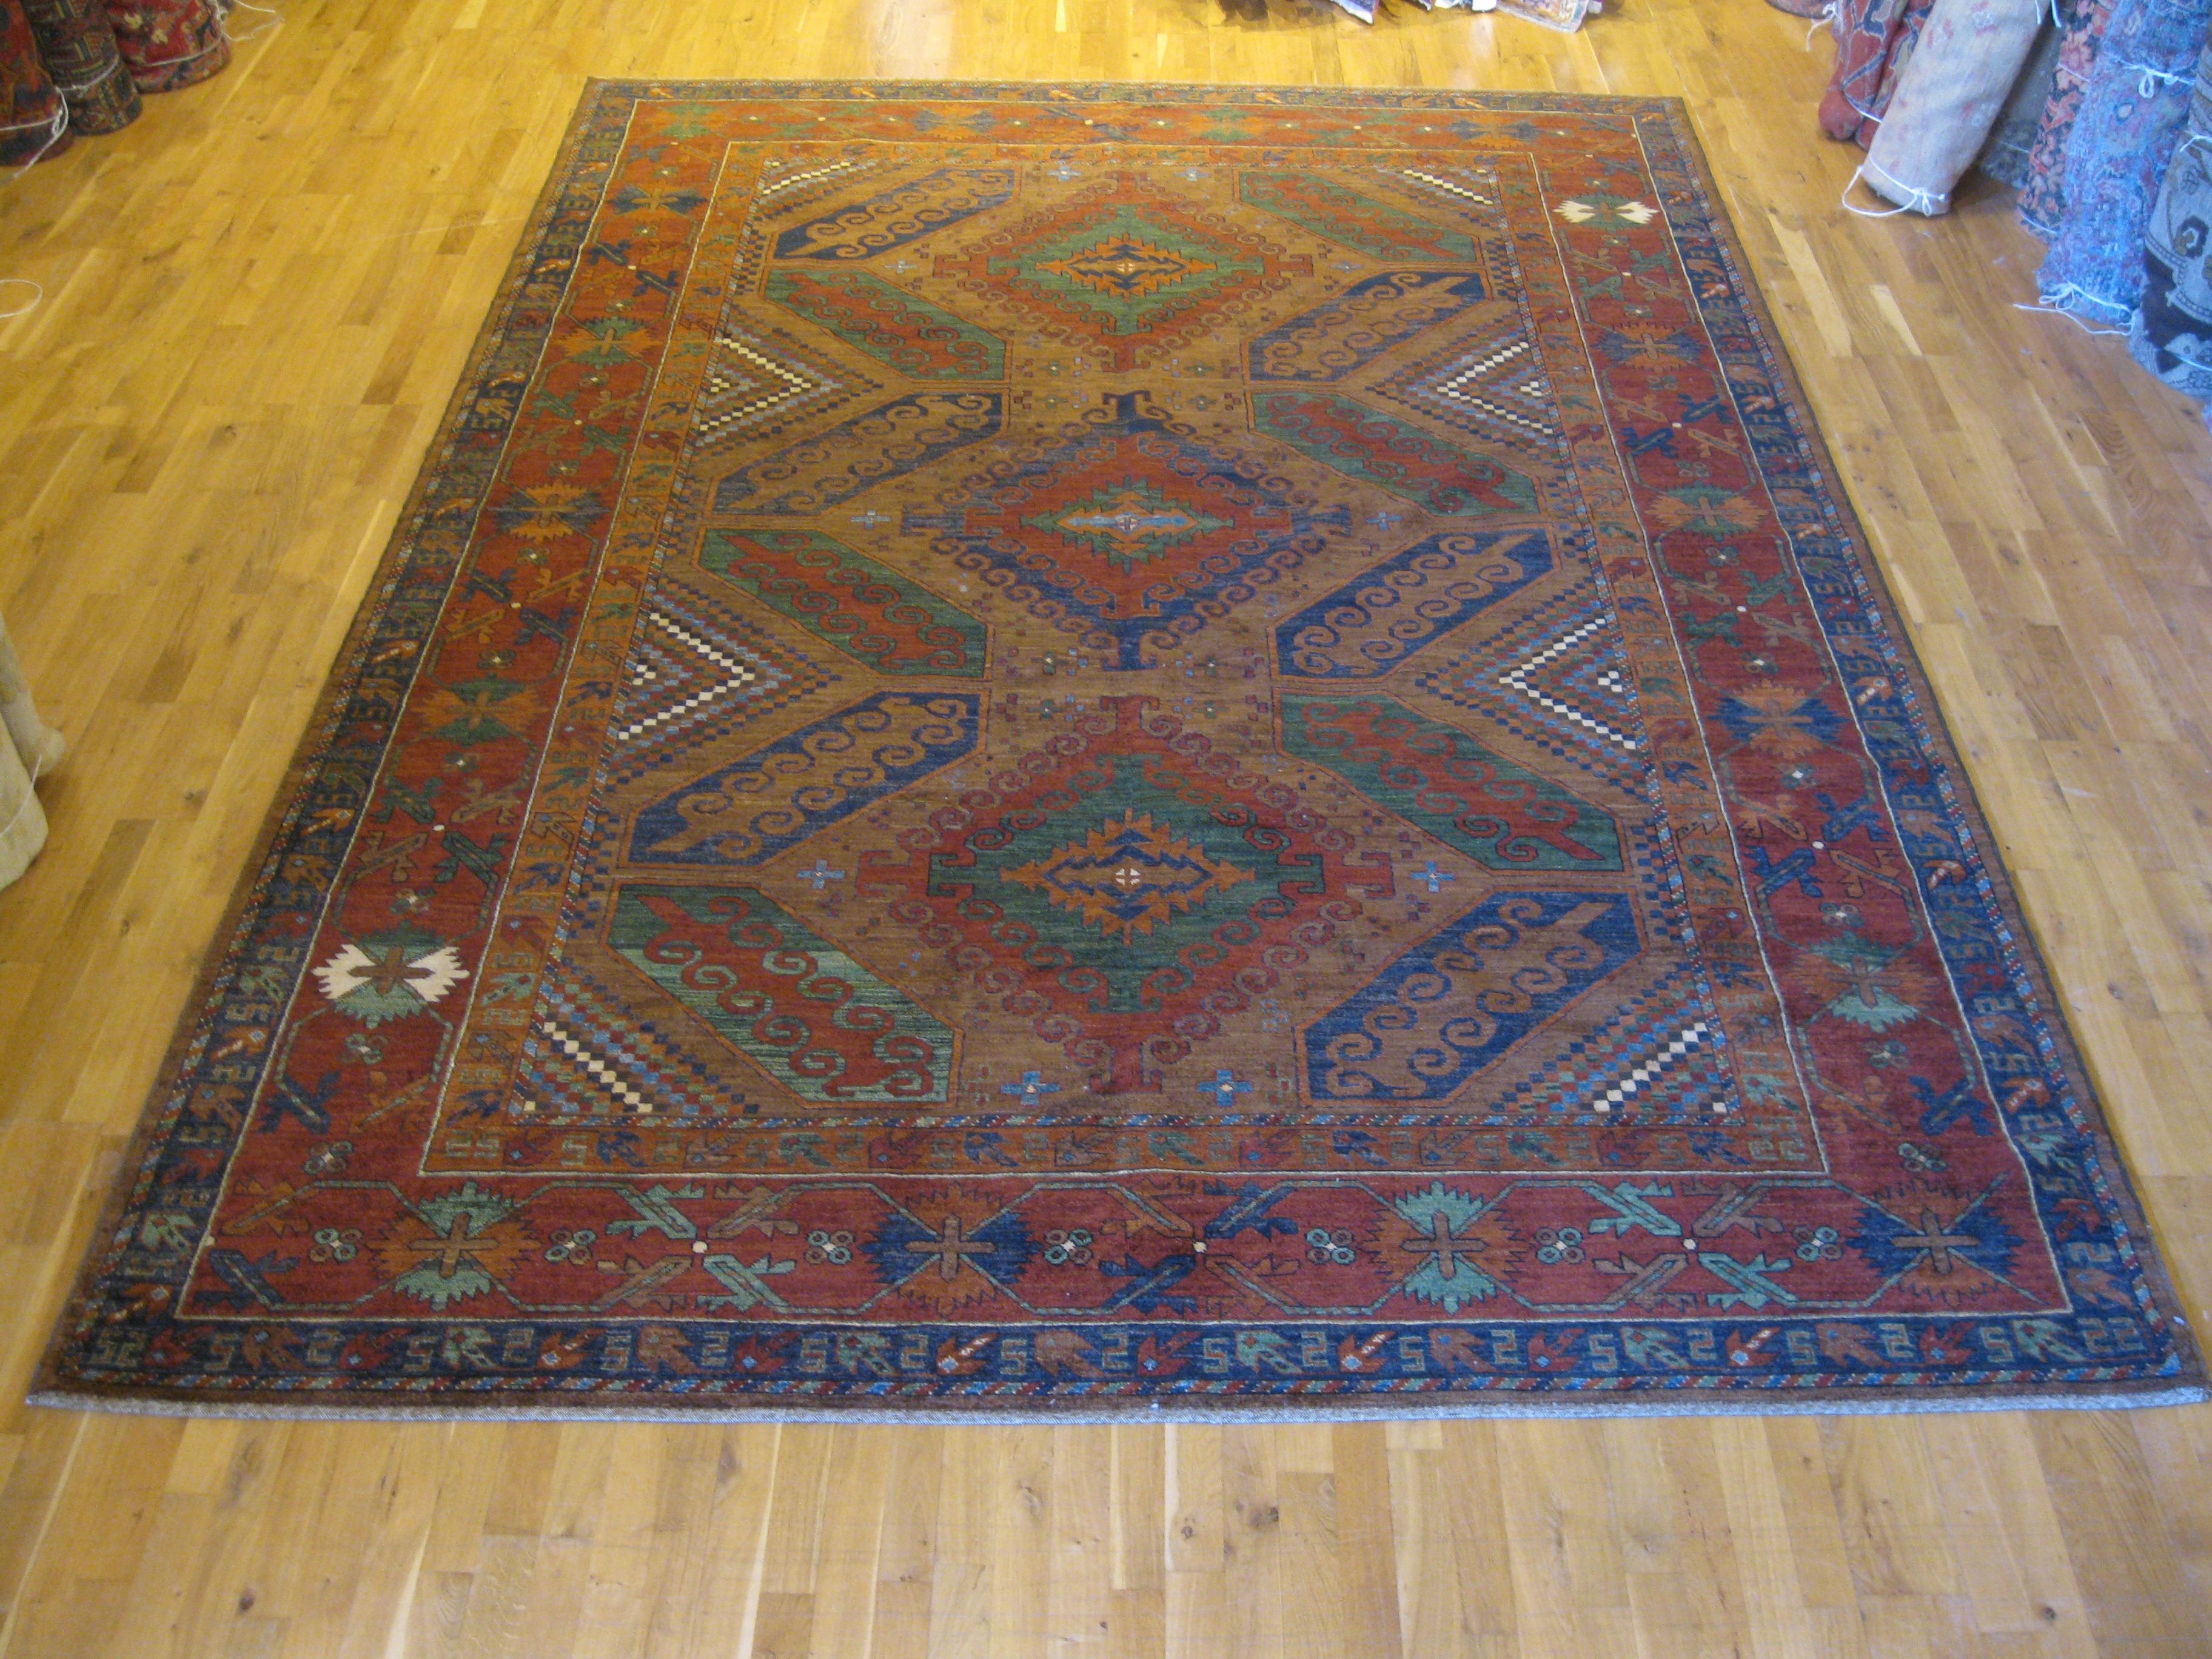 Baluchi carpets were originally made by Baluch nomads, living near the border between Iran, Pakistan and Afghanistan and were known for their lively designs. This contemporary example features the traditional red, brown and dark blue colors in an